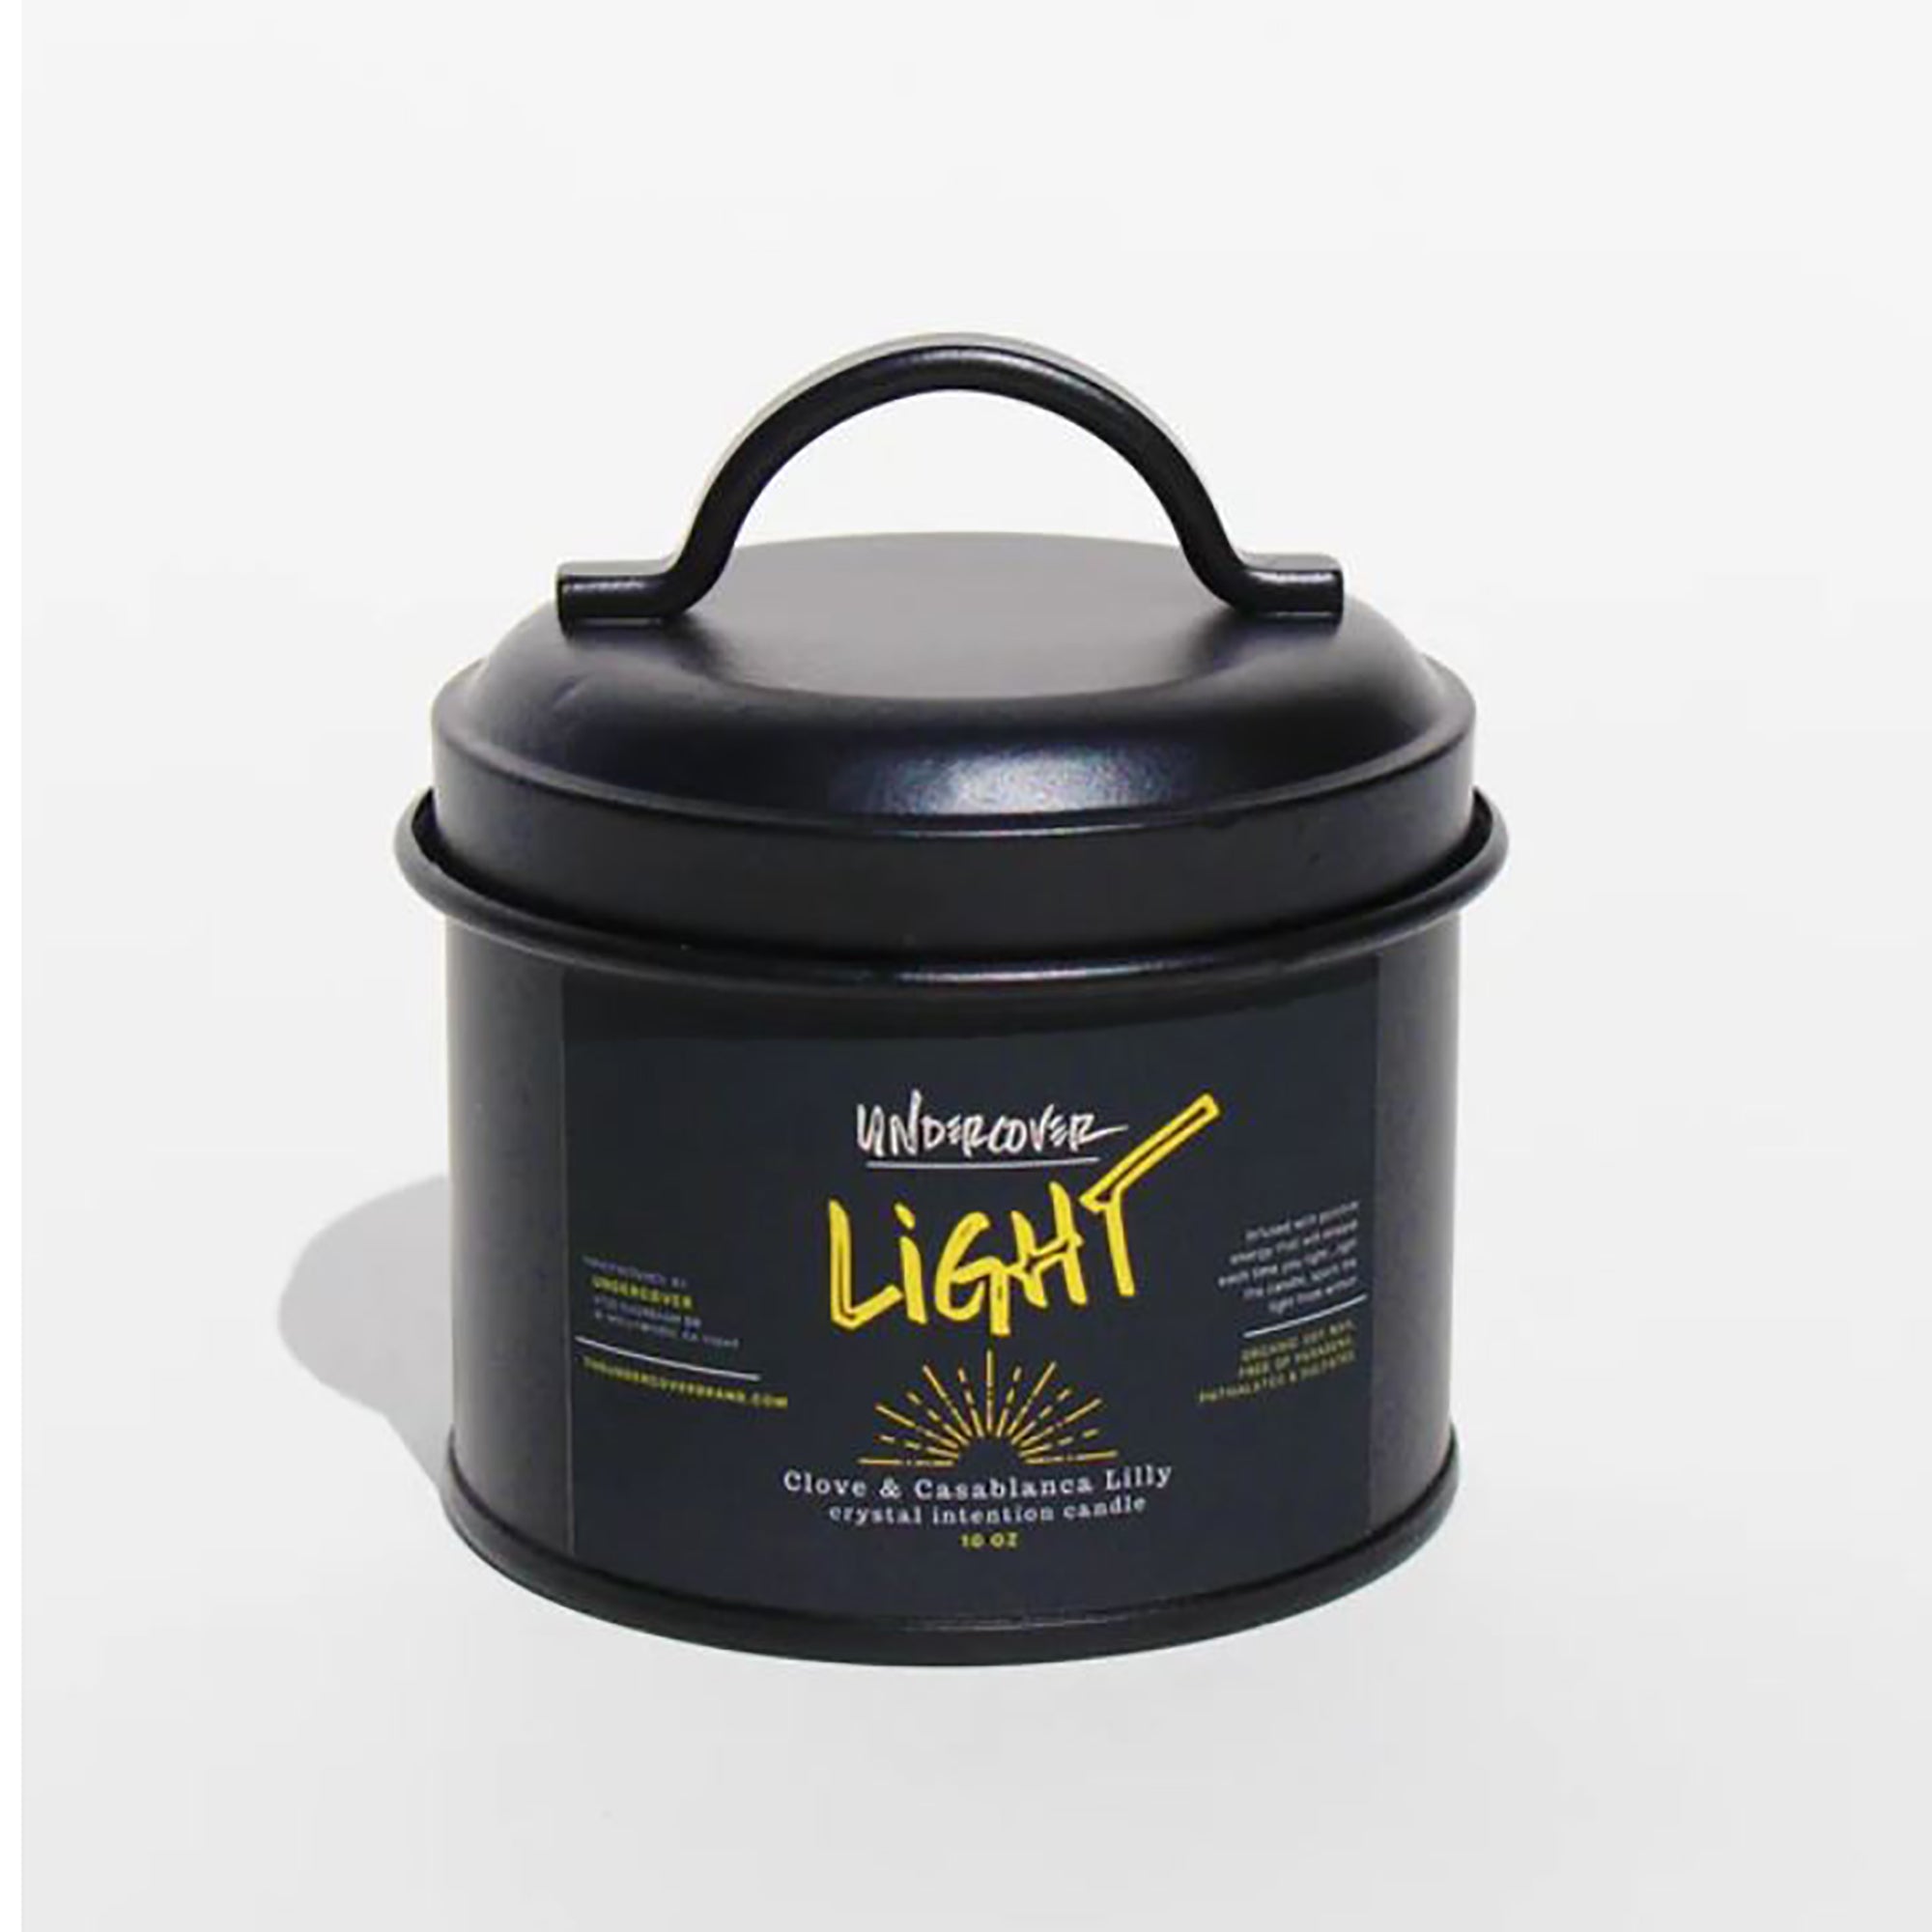 Undercover Dreams Light Candle / 10 OZ